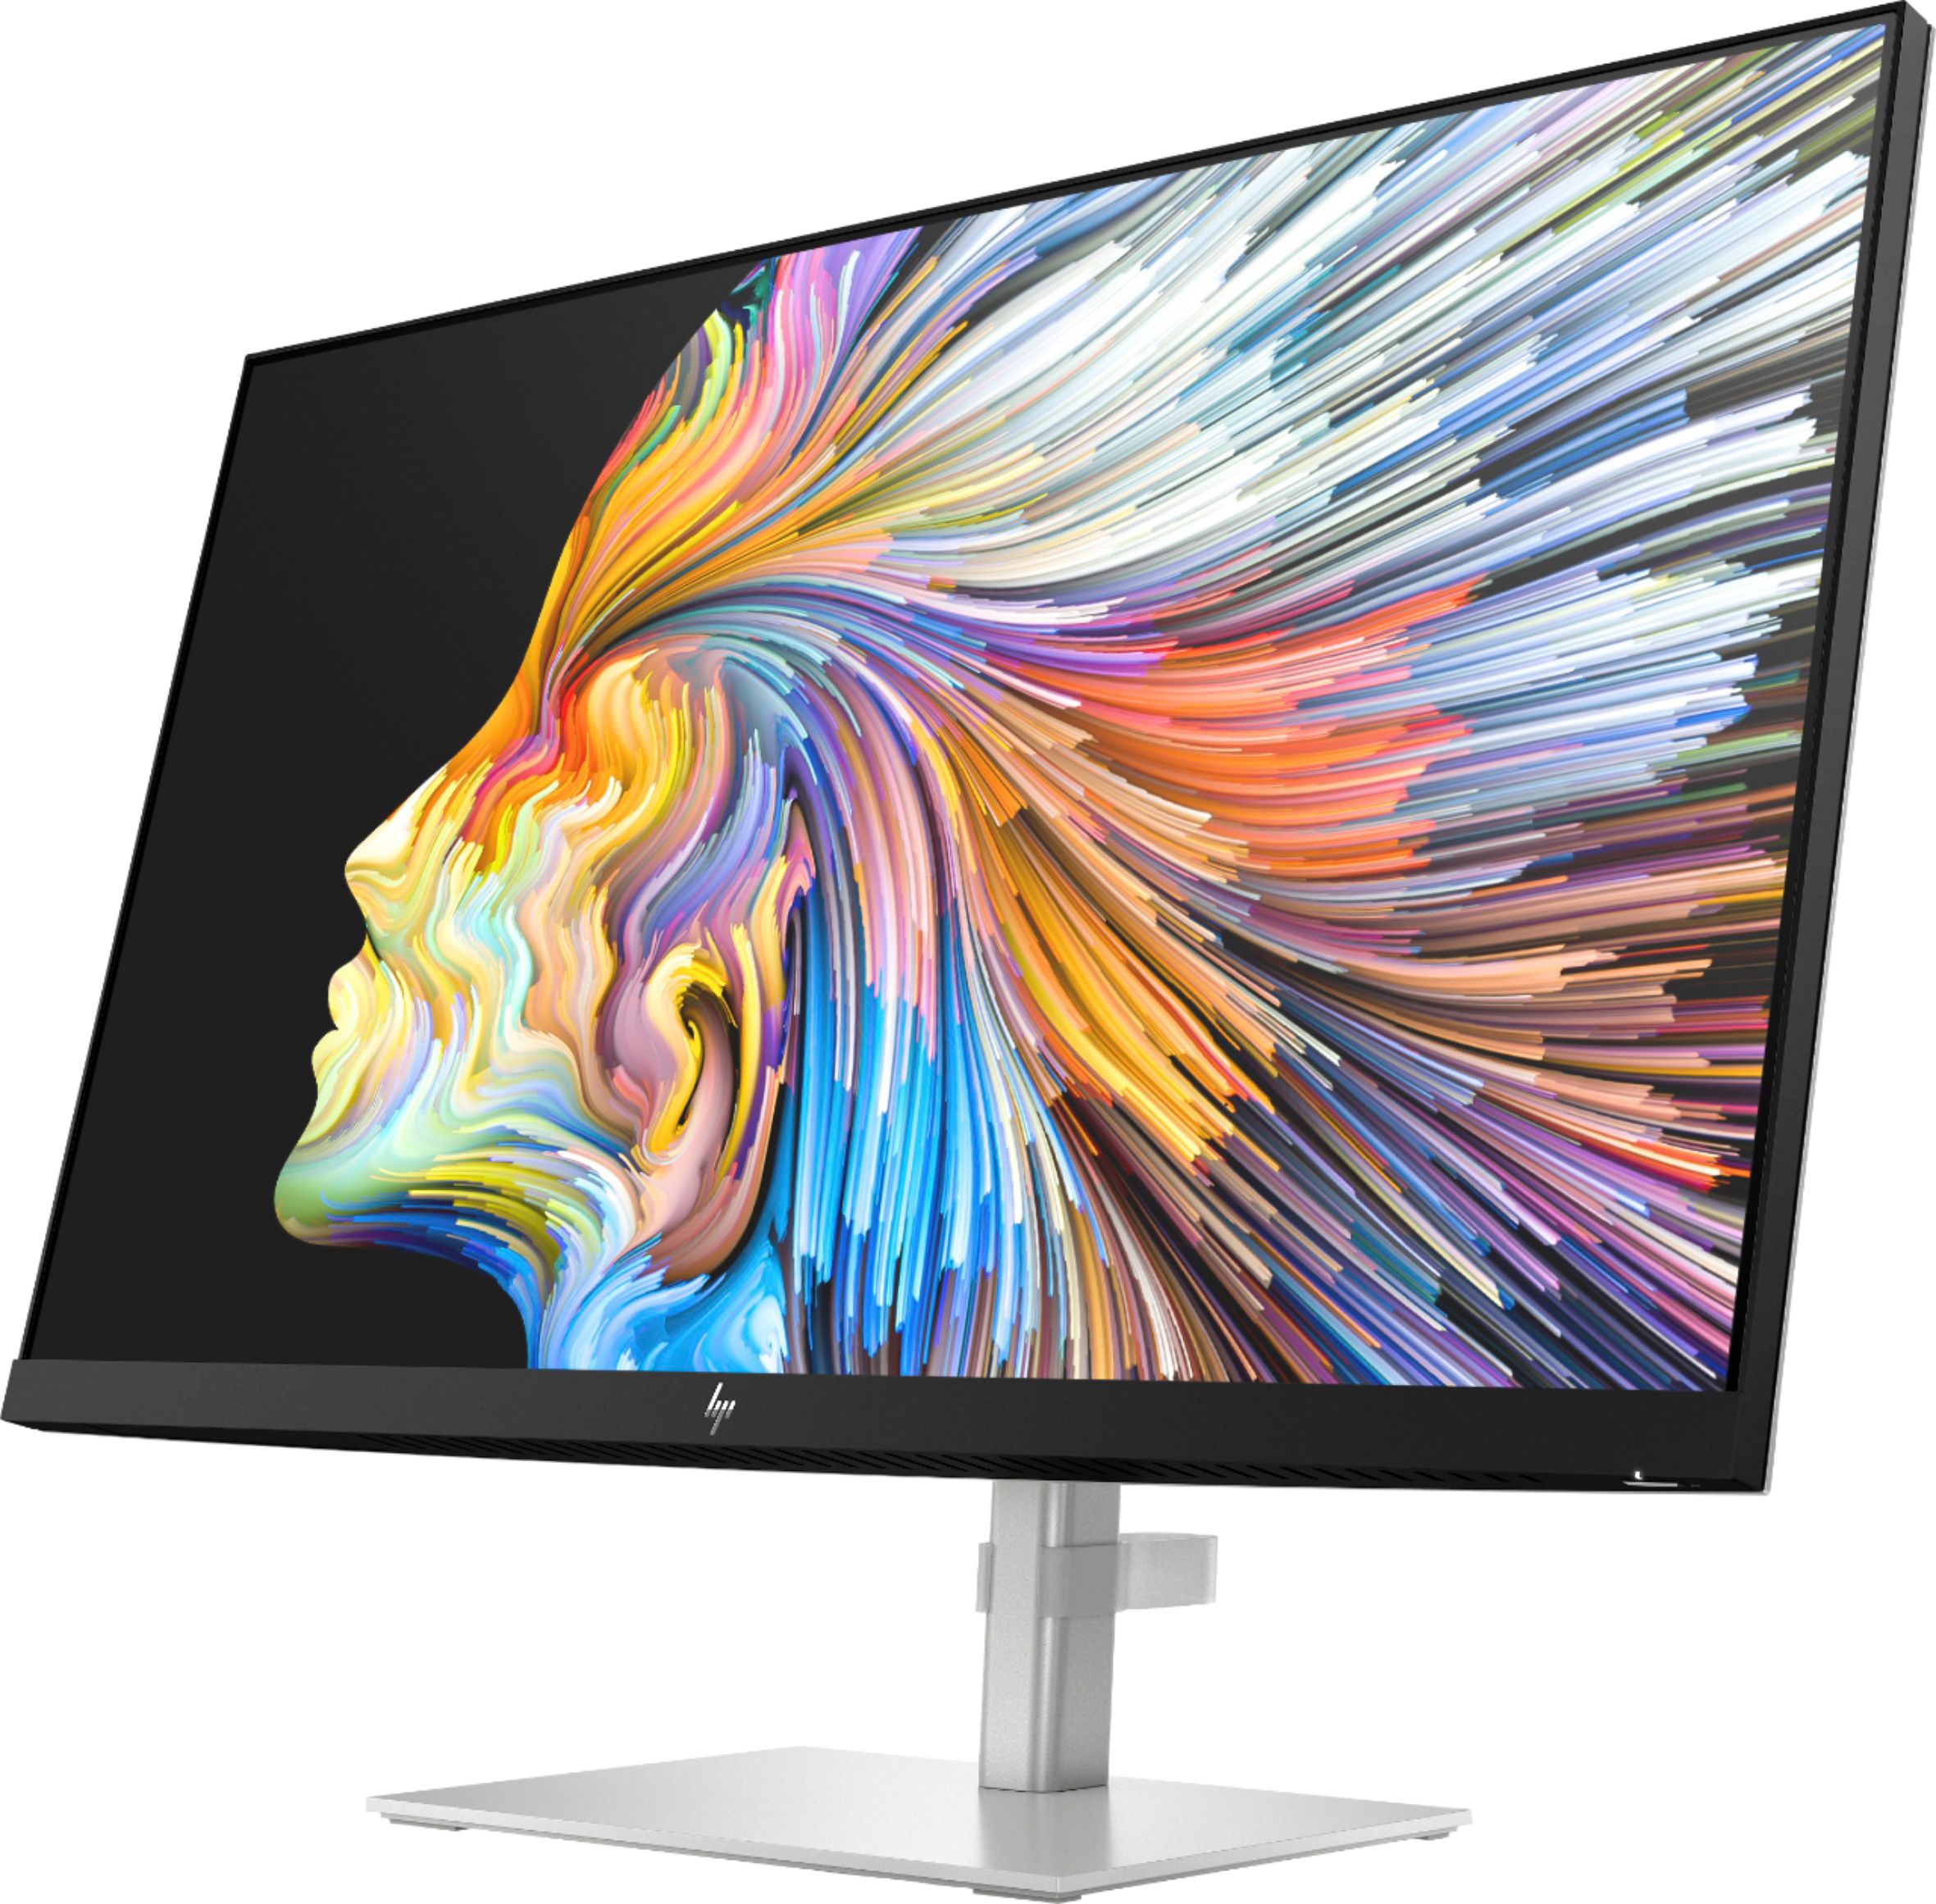 Angle View: HP - 28" IPS LED 4K UHD Monitor with HDR (HDMI, DisplayPort) - Silver & Black